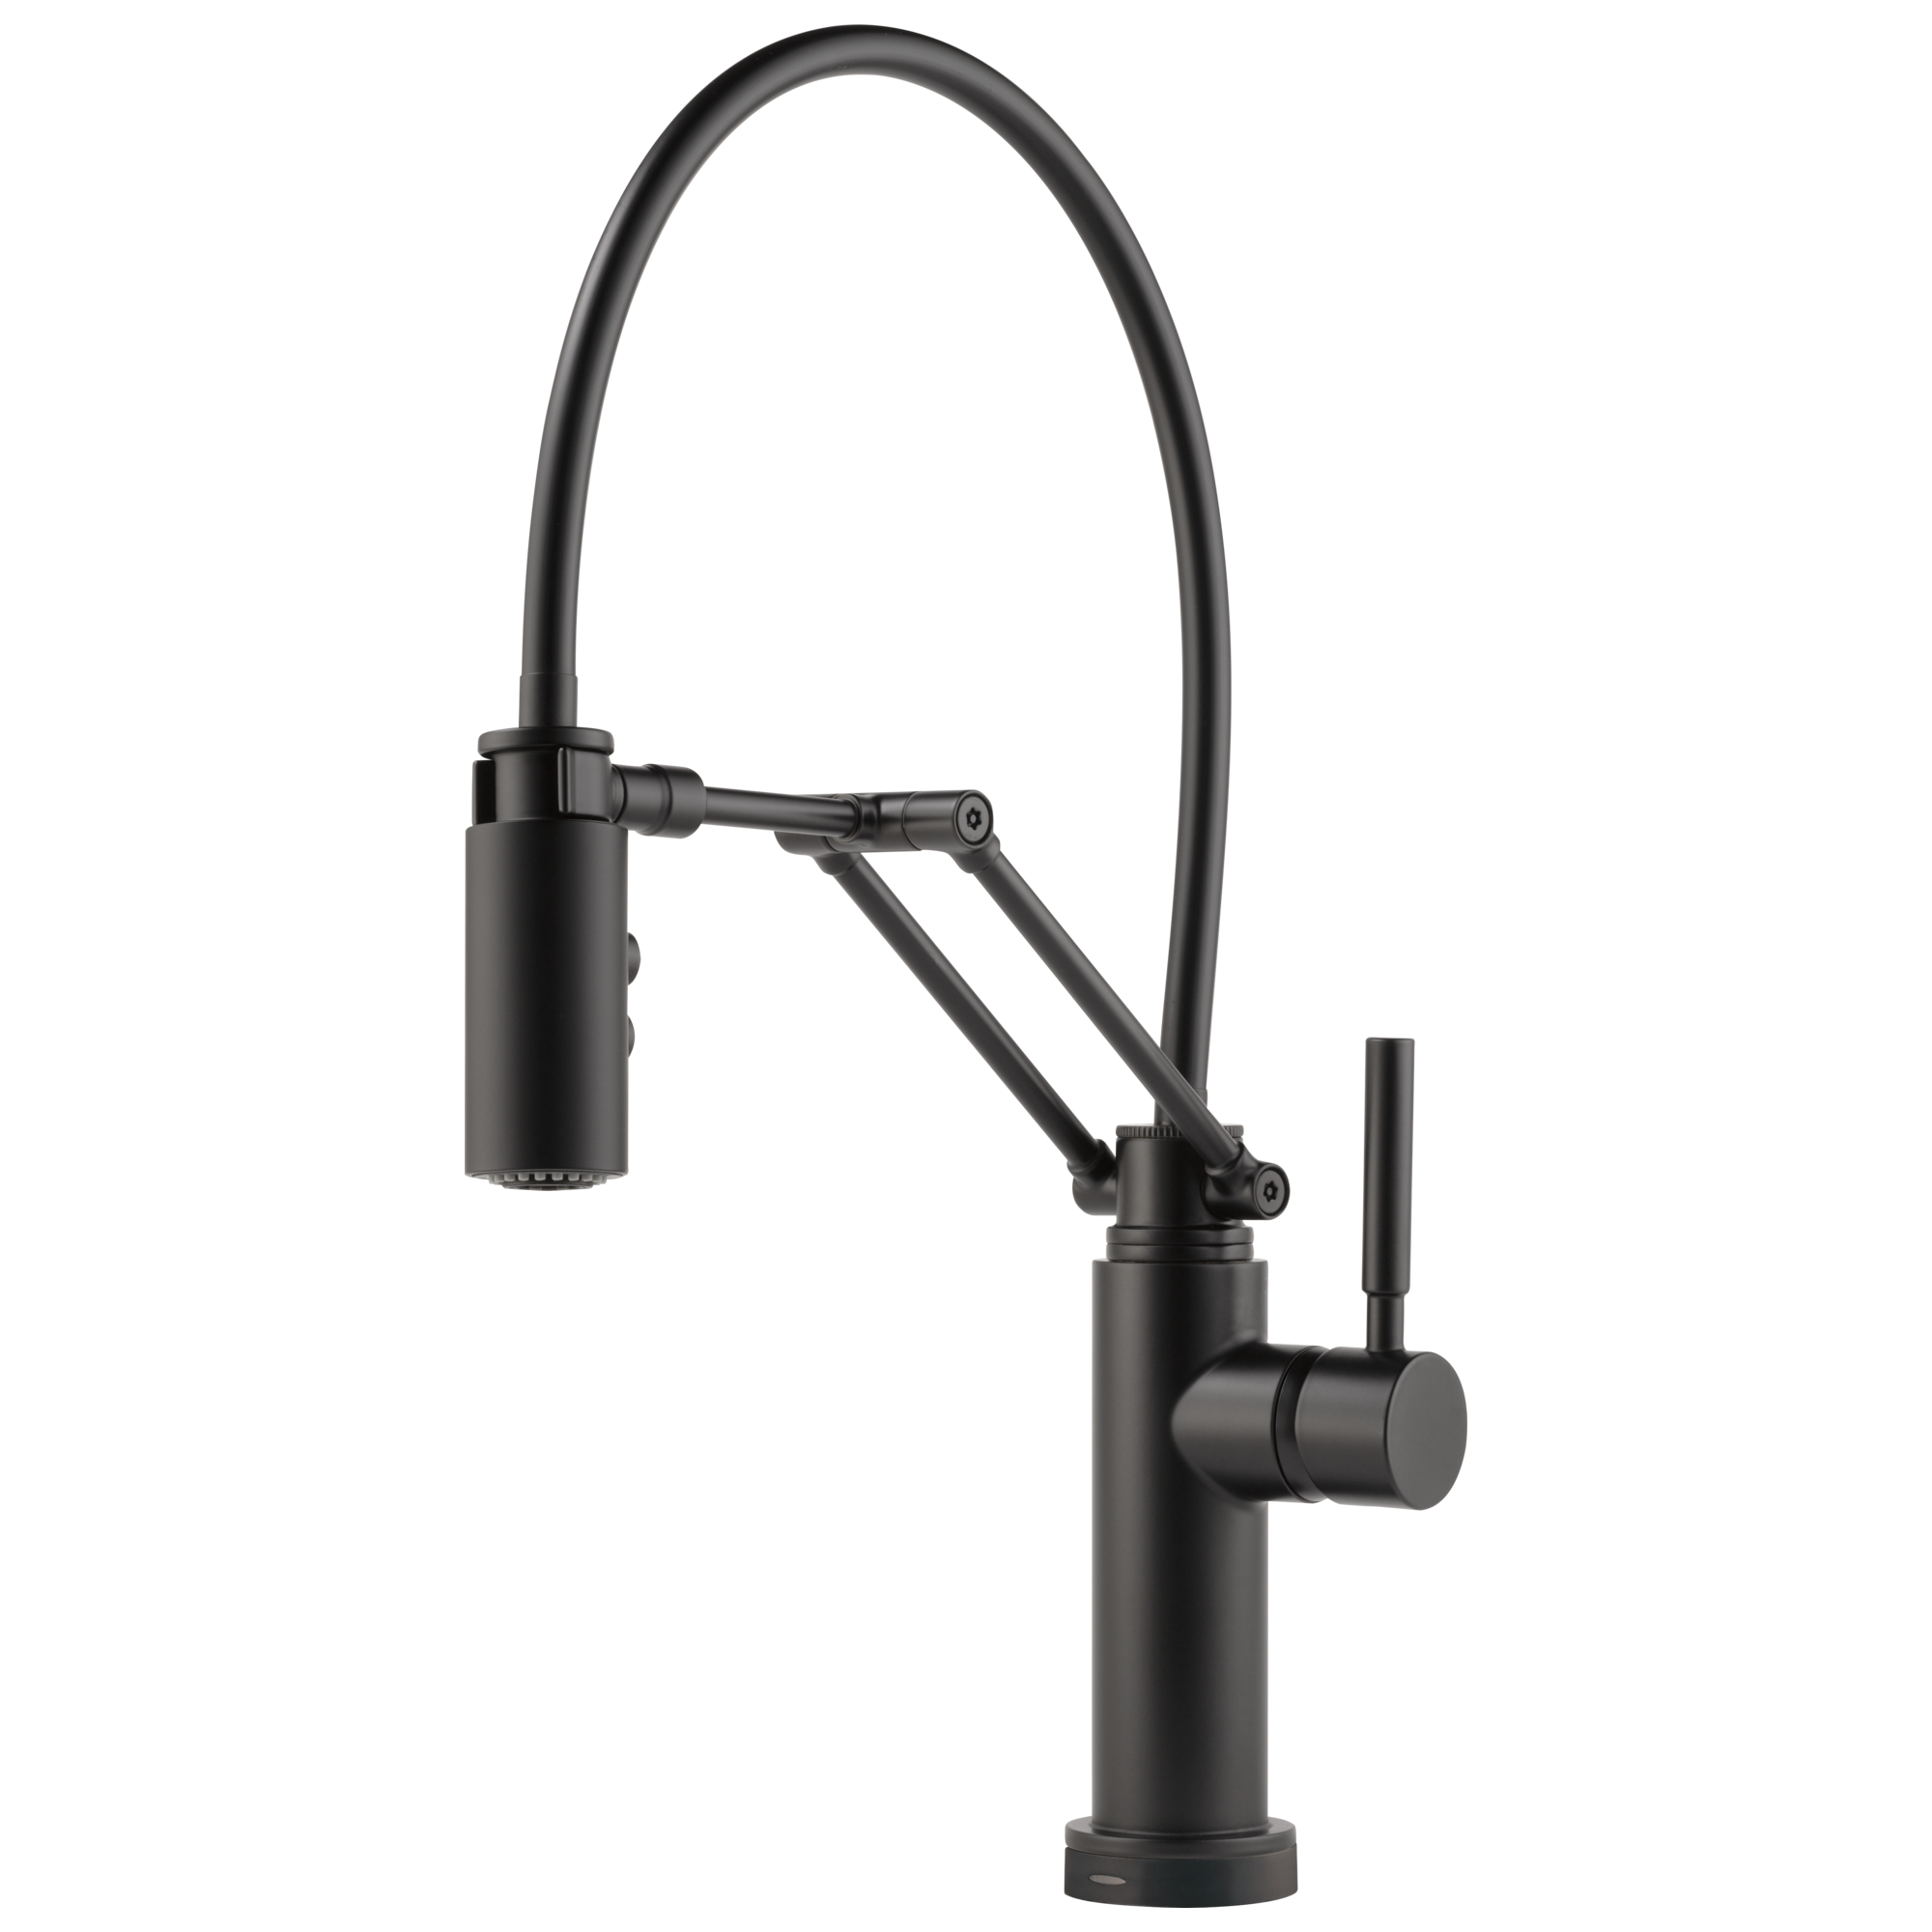 Brizo Solna Single Handle Articulating Kitchen Kitchen Faucet with Smart Touch Technology